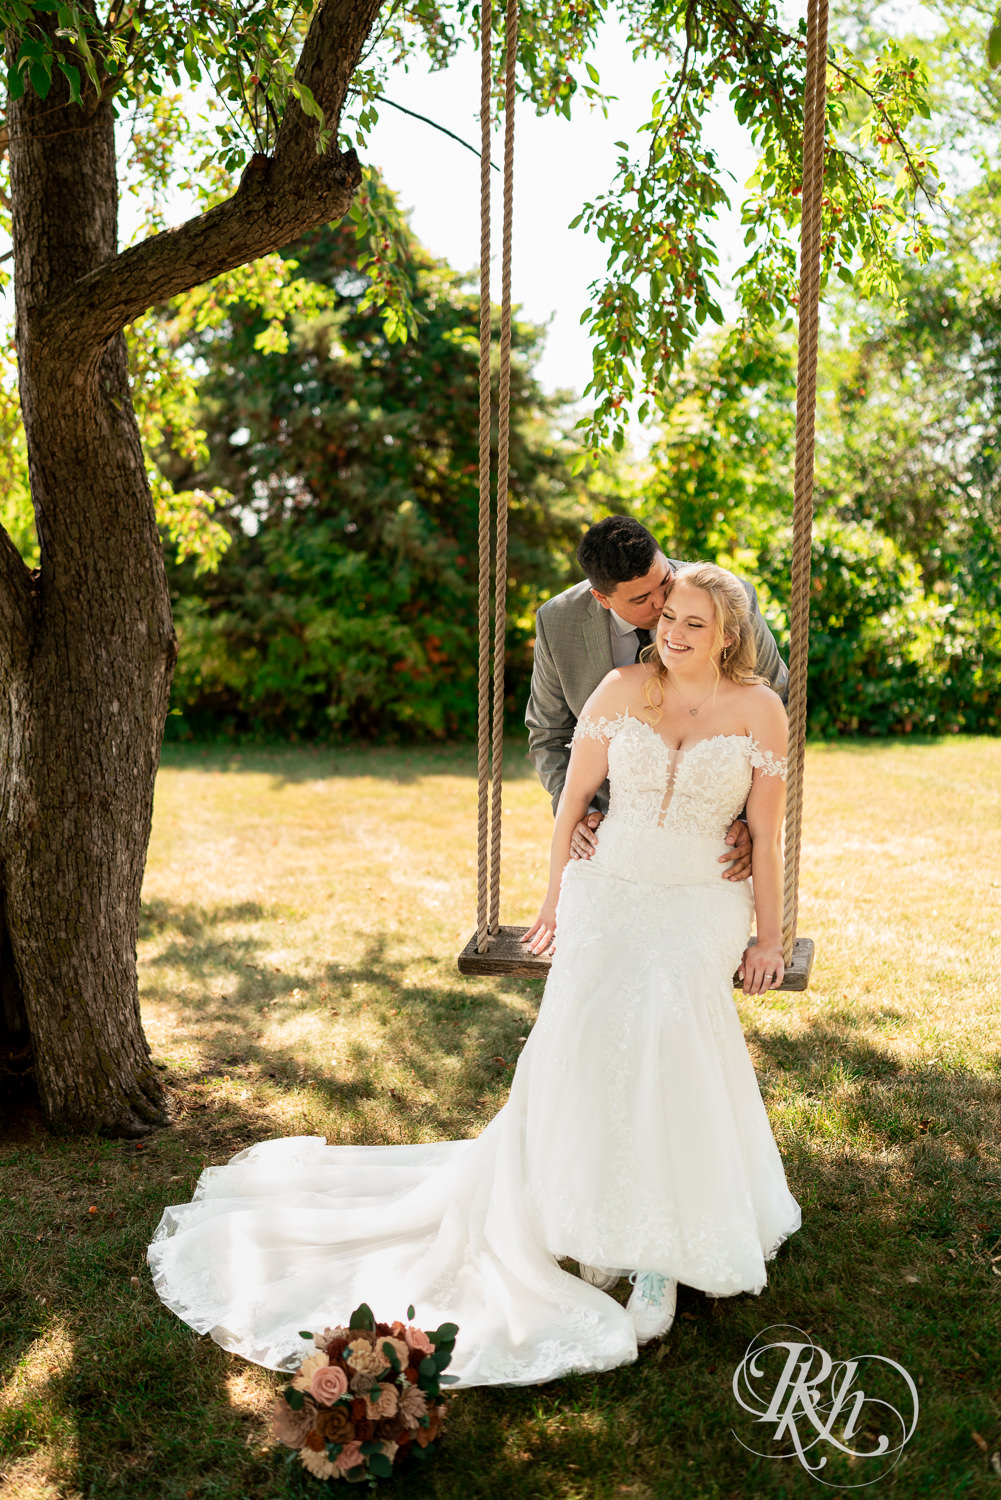 Bride and groom kiss on swing on wedding day at Cottage Farmhouse in Glencoe, Minnesota.